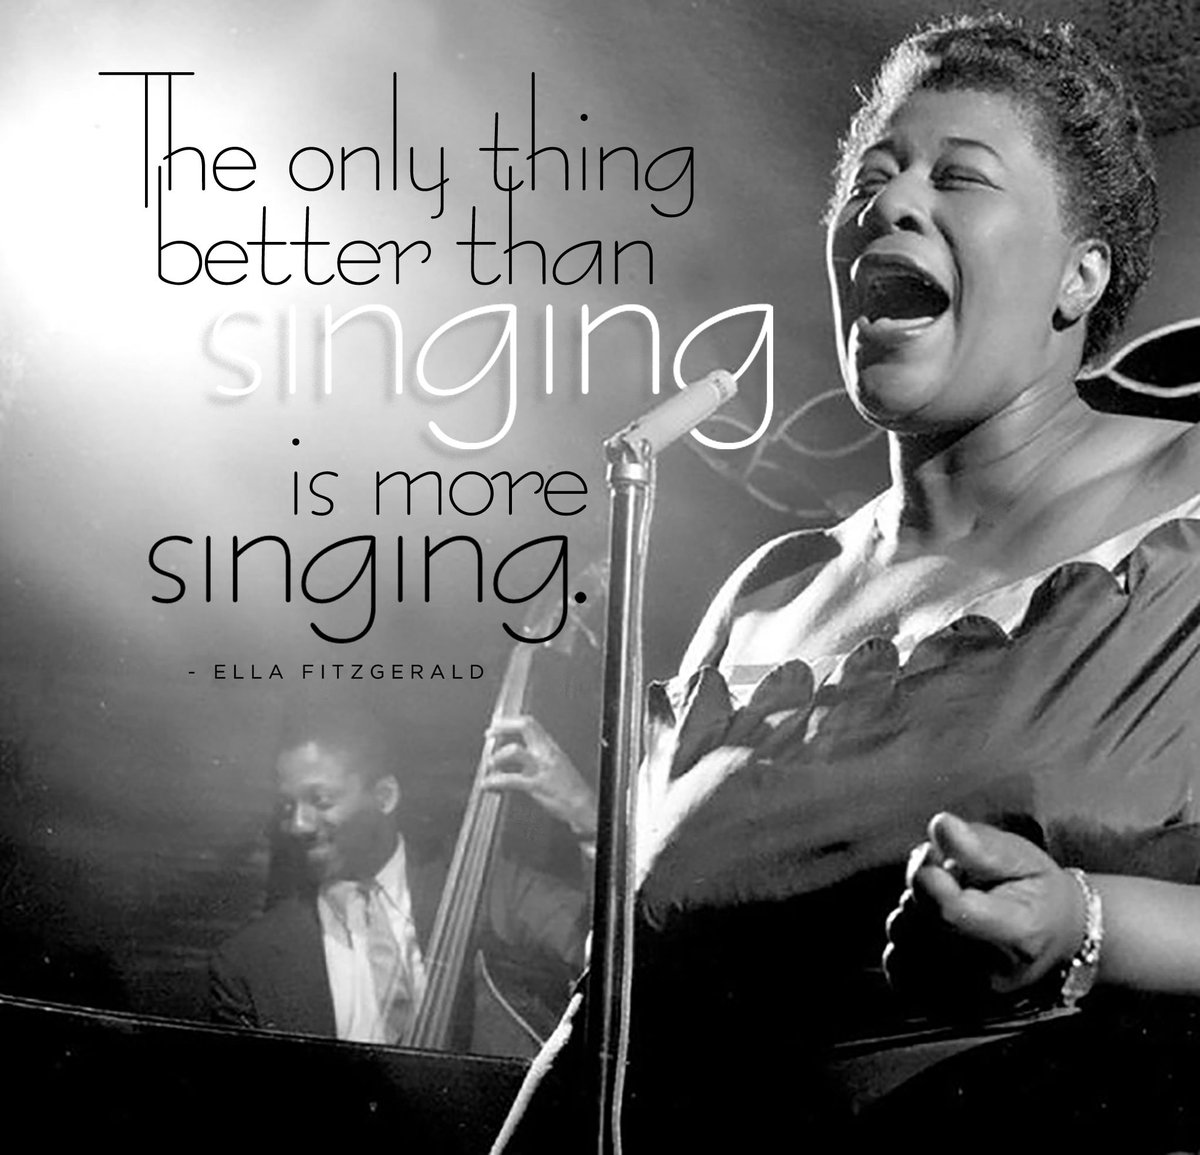 More hints for something new coming soon!

#motivationmonday #ellafitzgerald #news #comingsoon #singer #voice